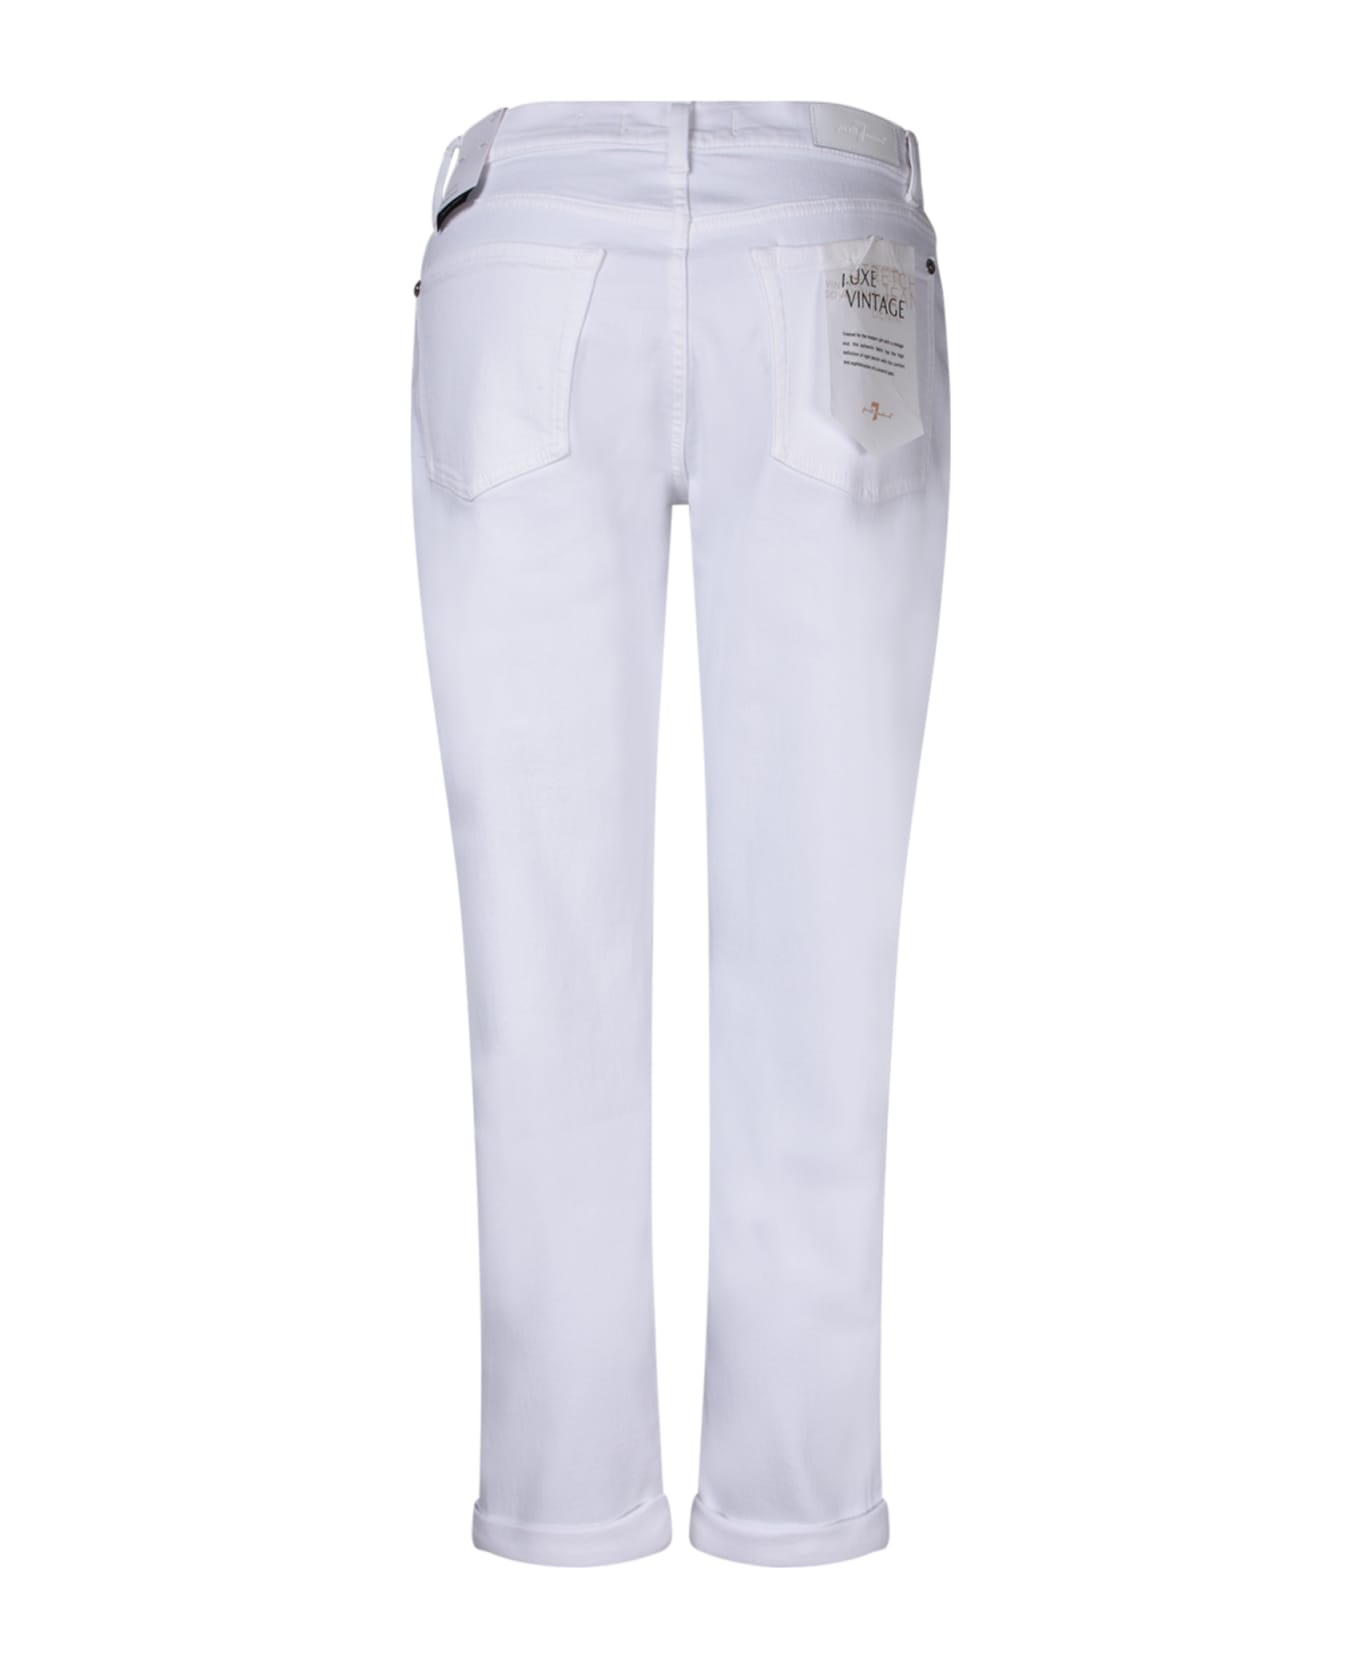 7 For All Mankind Josefina White Jeans By 7 For All Mankind - White